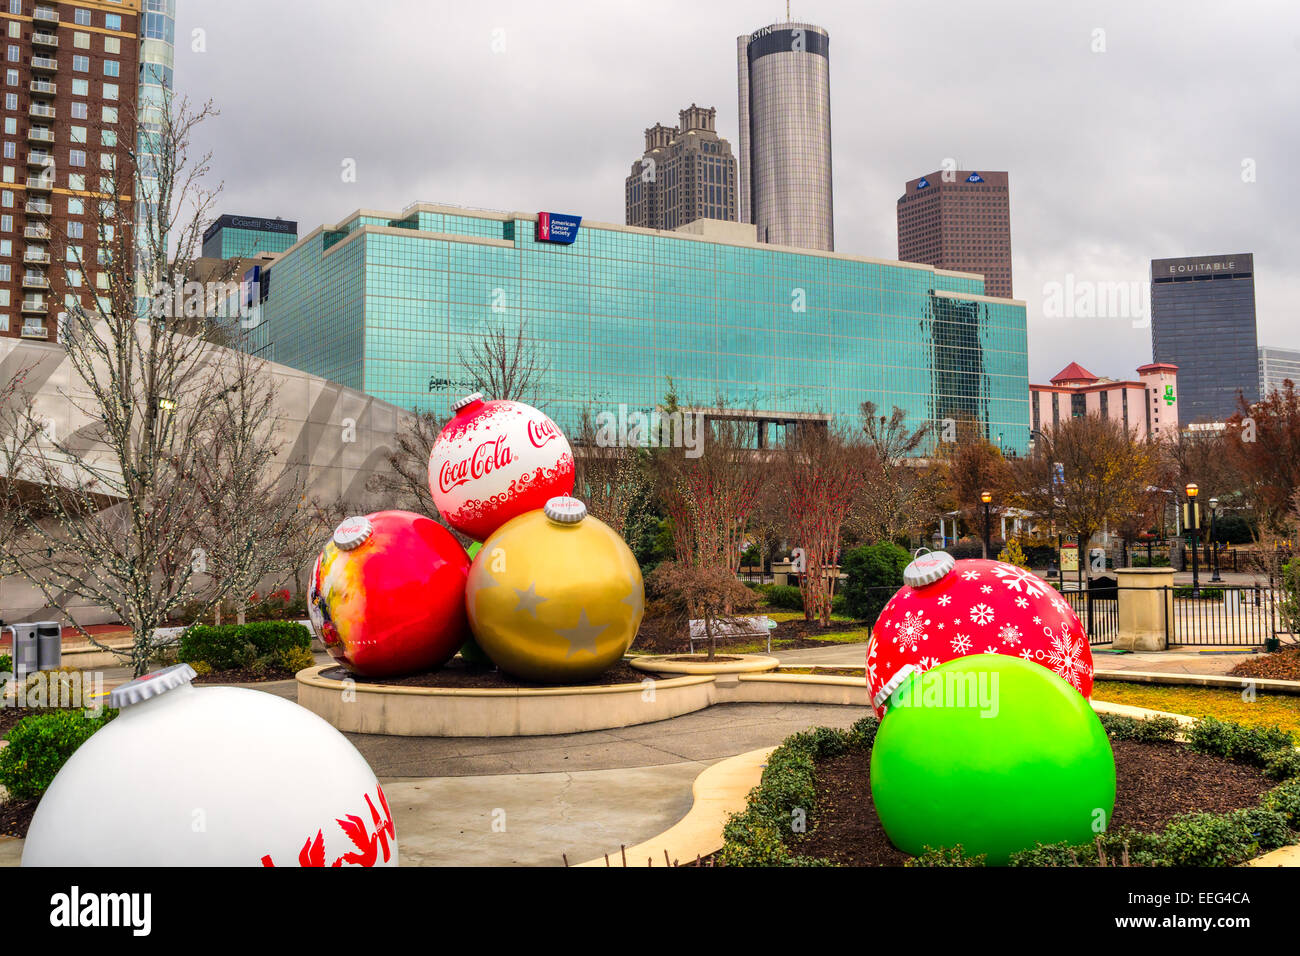 ATLANTA, GA, USA - DECEMBER 04: The World of Coca-Cola at Pemberton Place is a museum dedicated to the history of Coca-Cola, a w Stock Photo